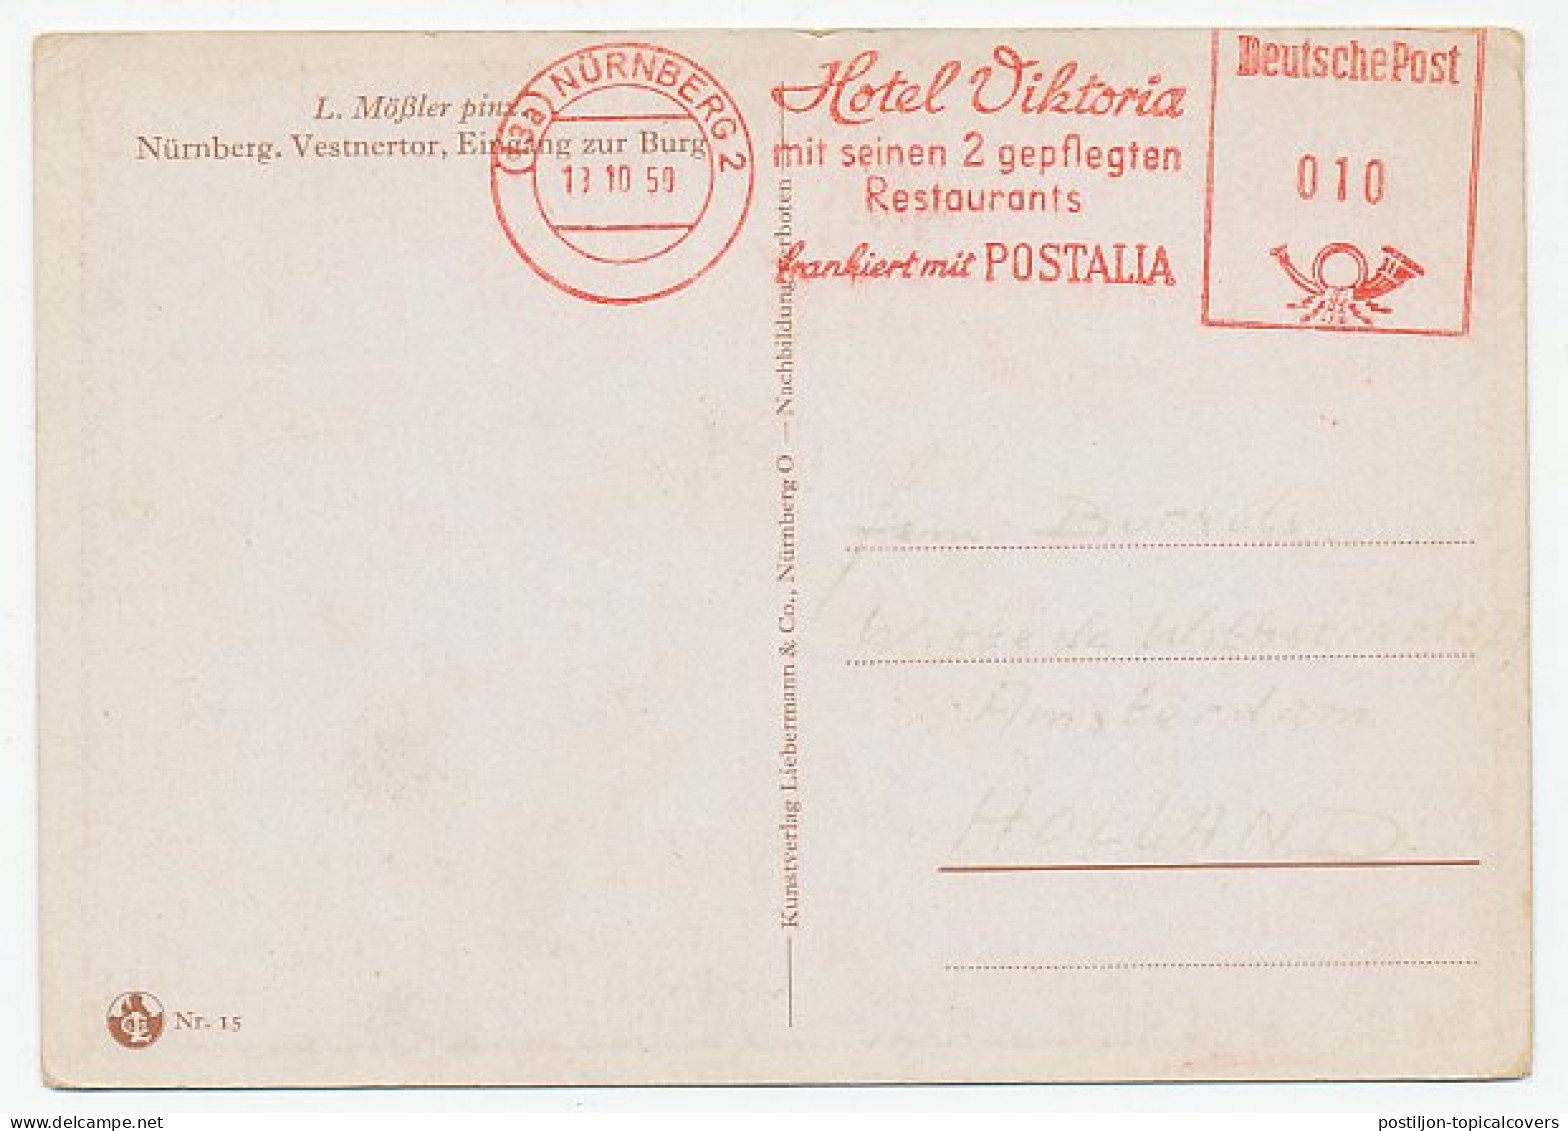 Meter Postcard Germany 1950 Franked With Postalia - Hotel Victoria - Automatenmarken [ATM]